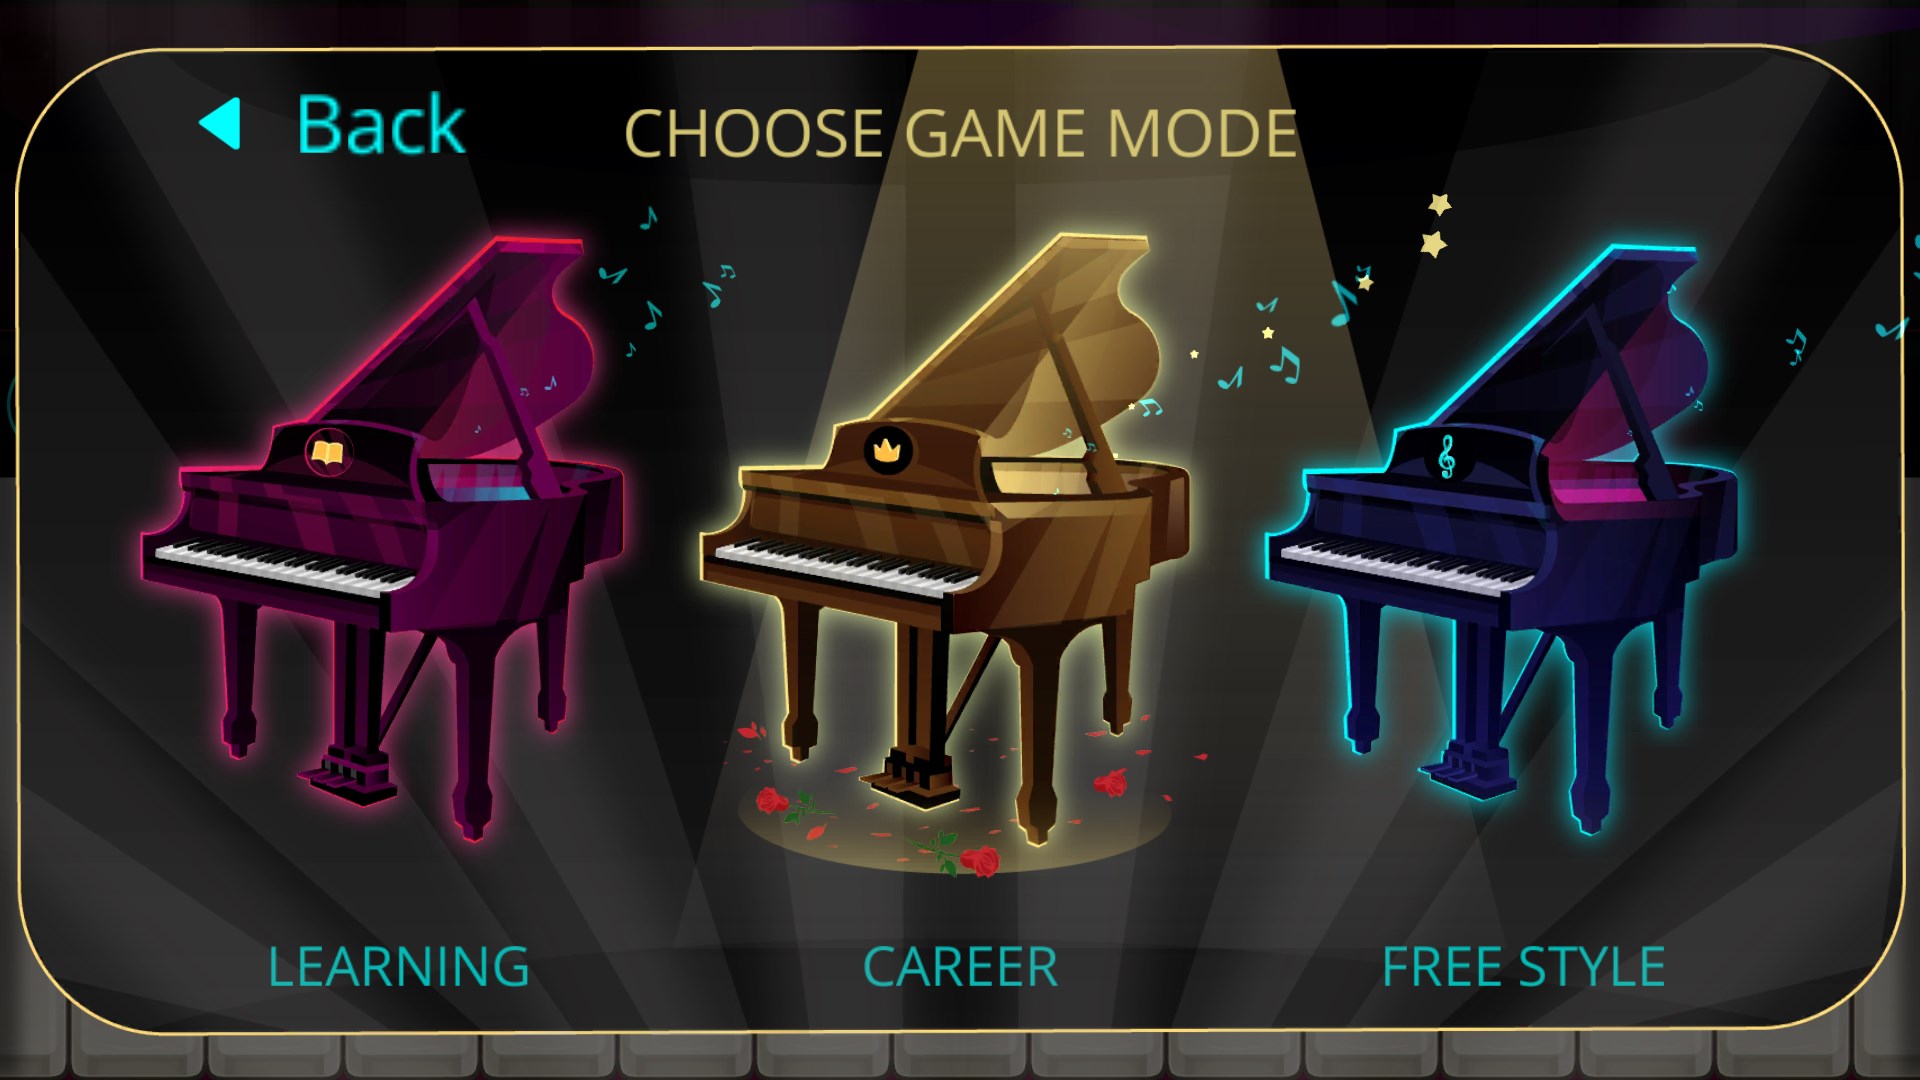 Piano Music Game - Microsoft Apps